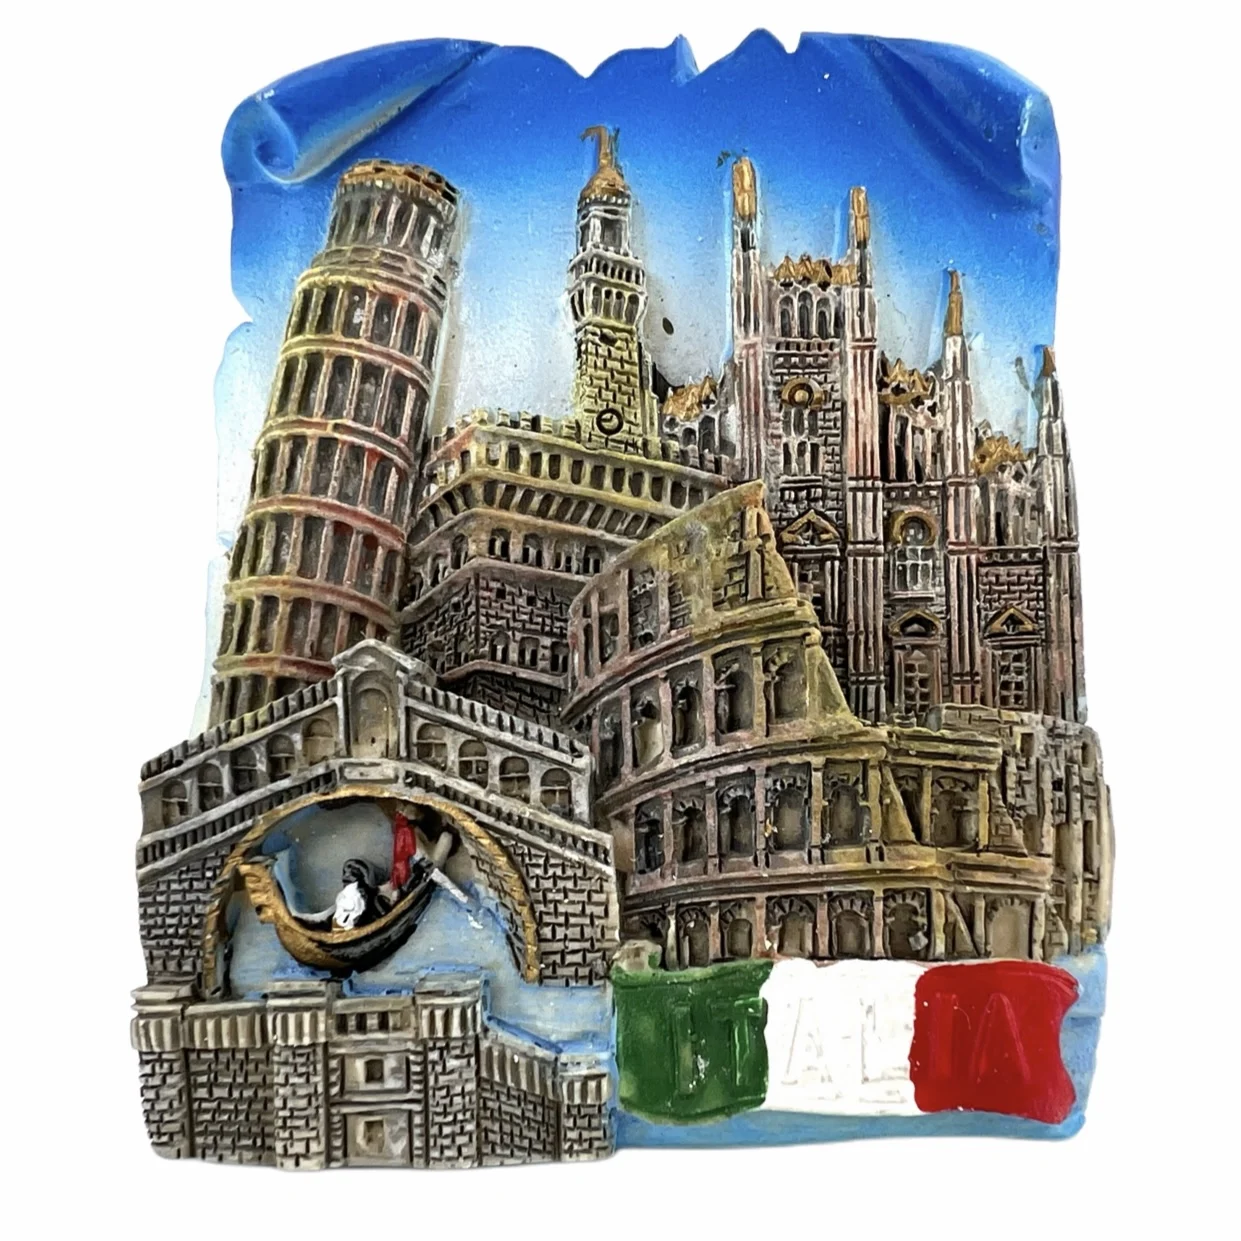 

Rome Leaning Tower of Pisa Colosseum Italy Fridge Magnets Travel 3D Memorial Magnetic Refrigerator Stickers Gift